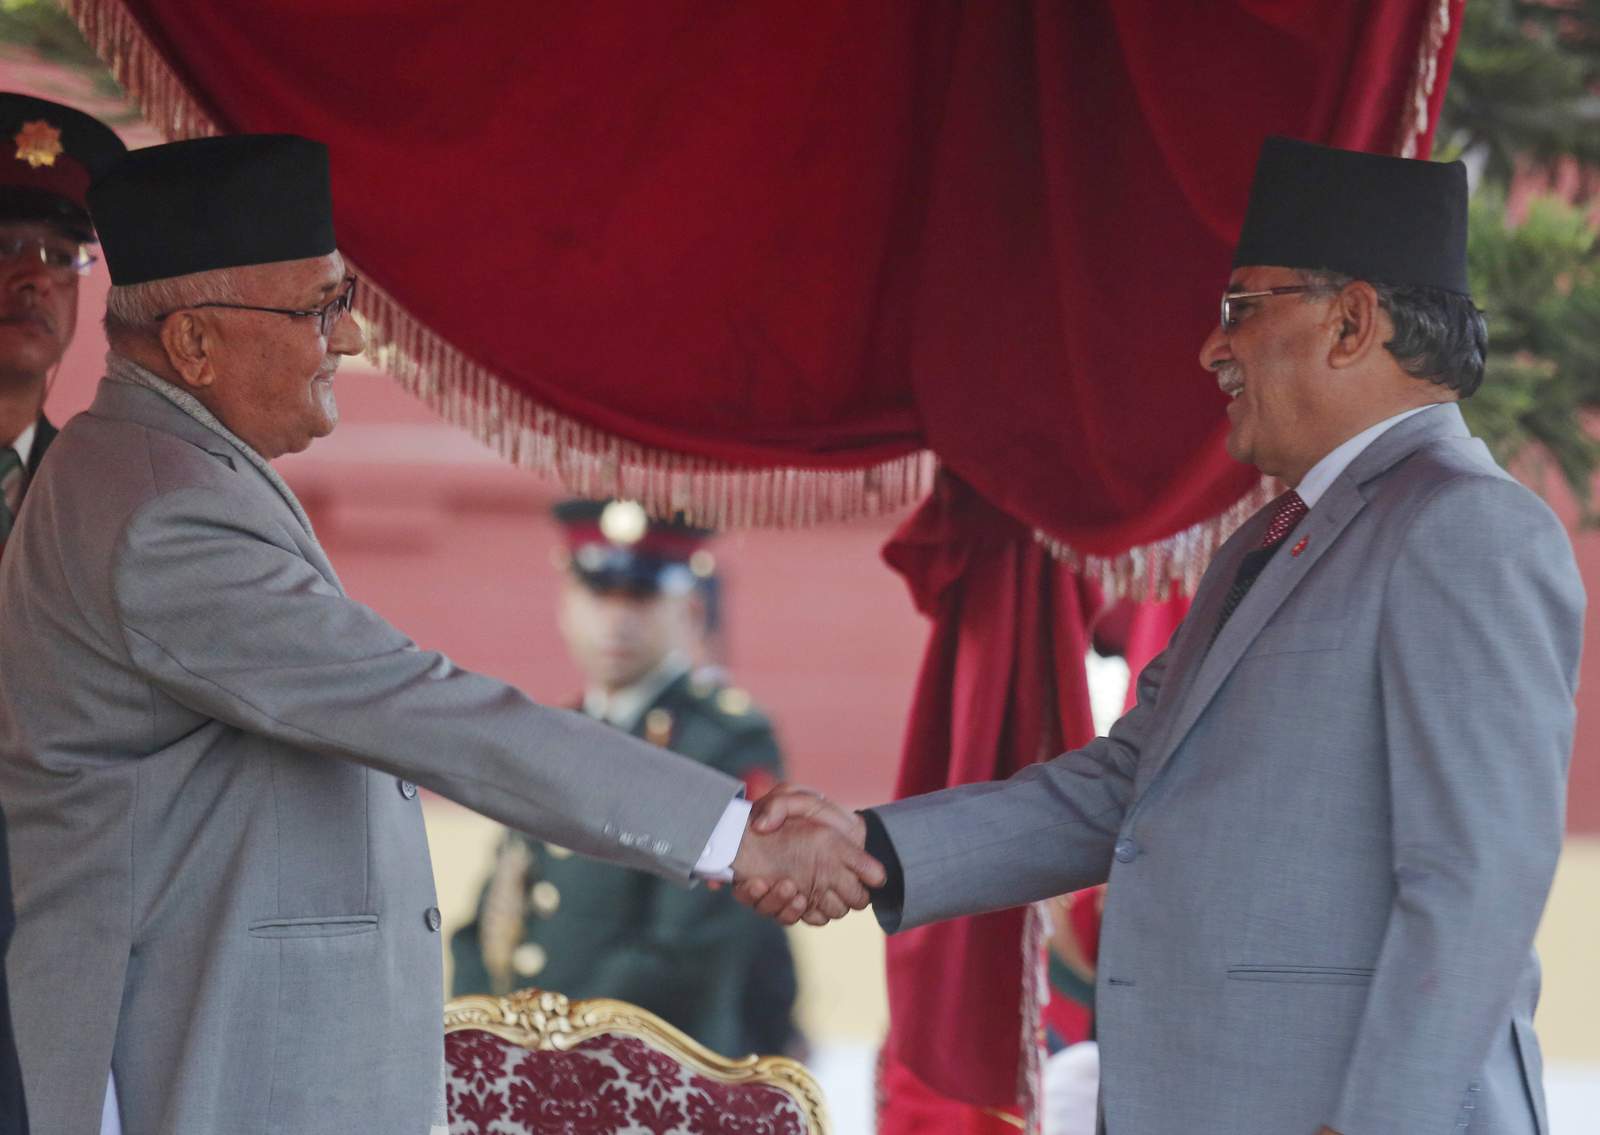 Power tussle in Nepal ruling party as China influence grows